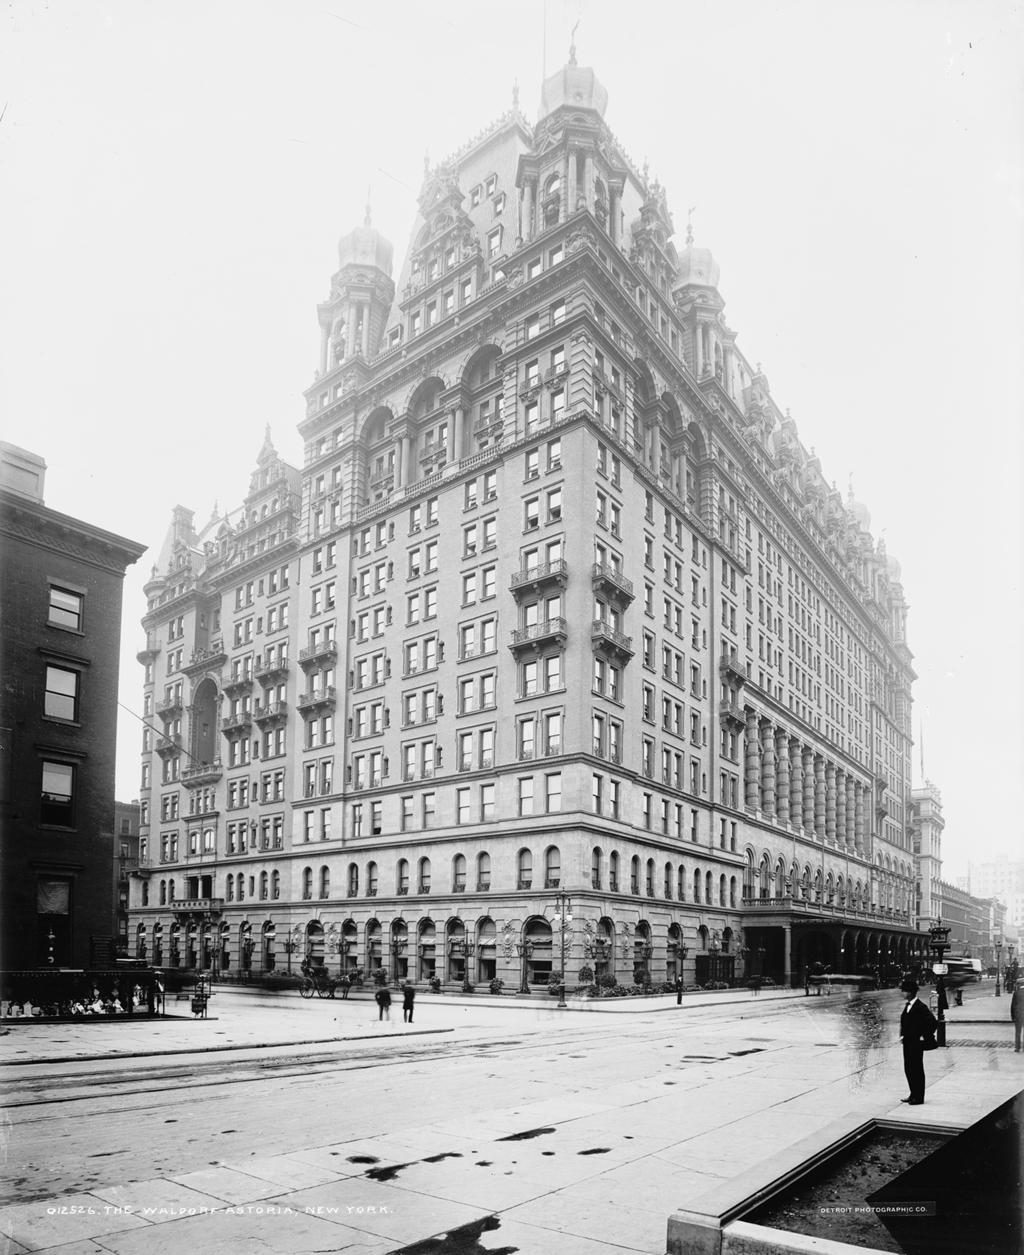 Iconic Waldorf Astoria From 1893 To Todays Elegance 3977